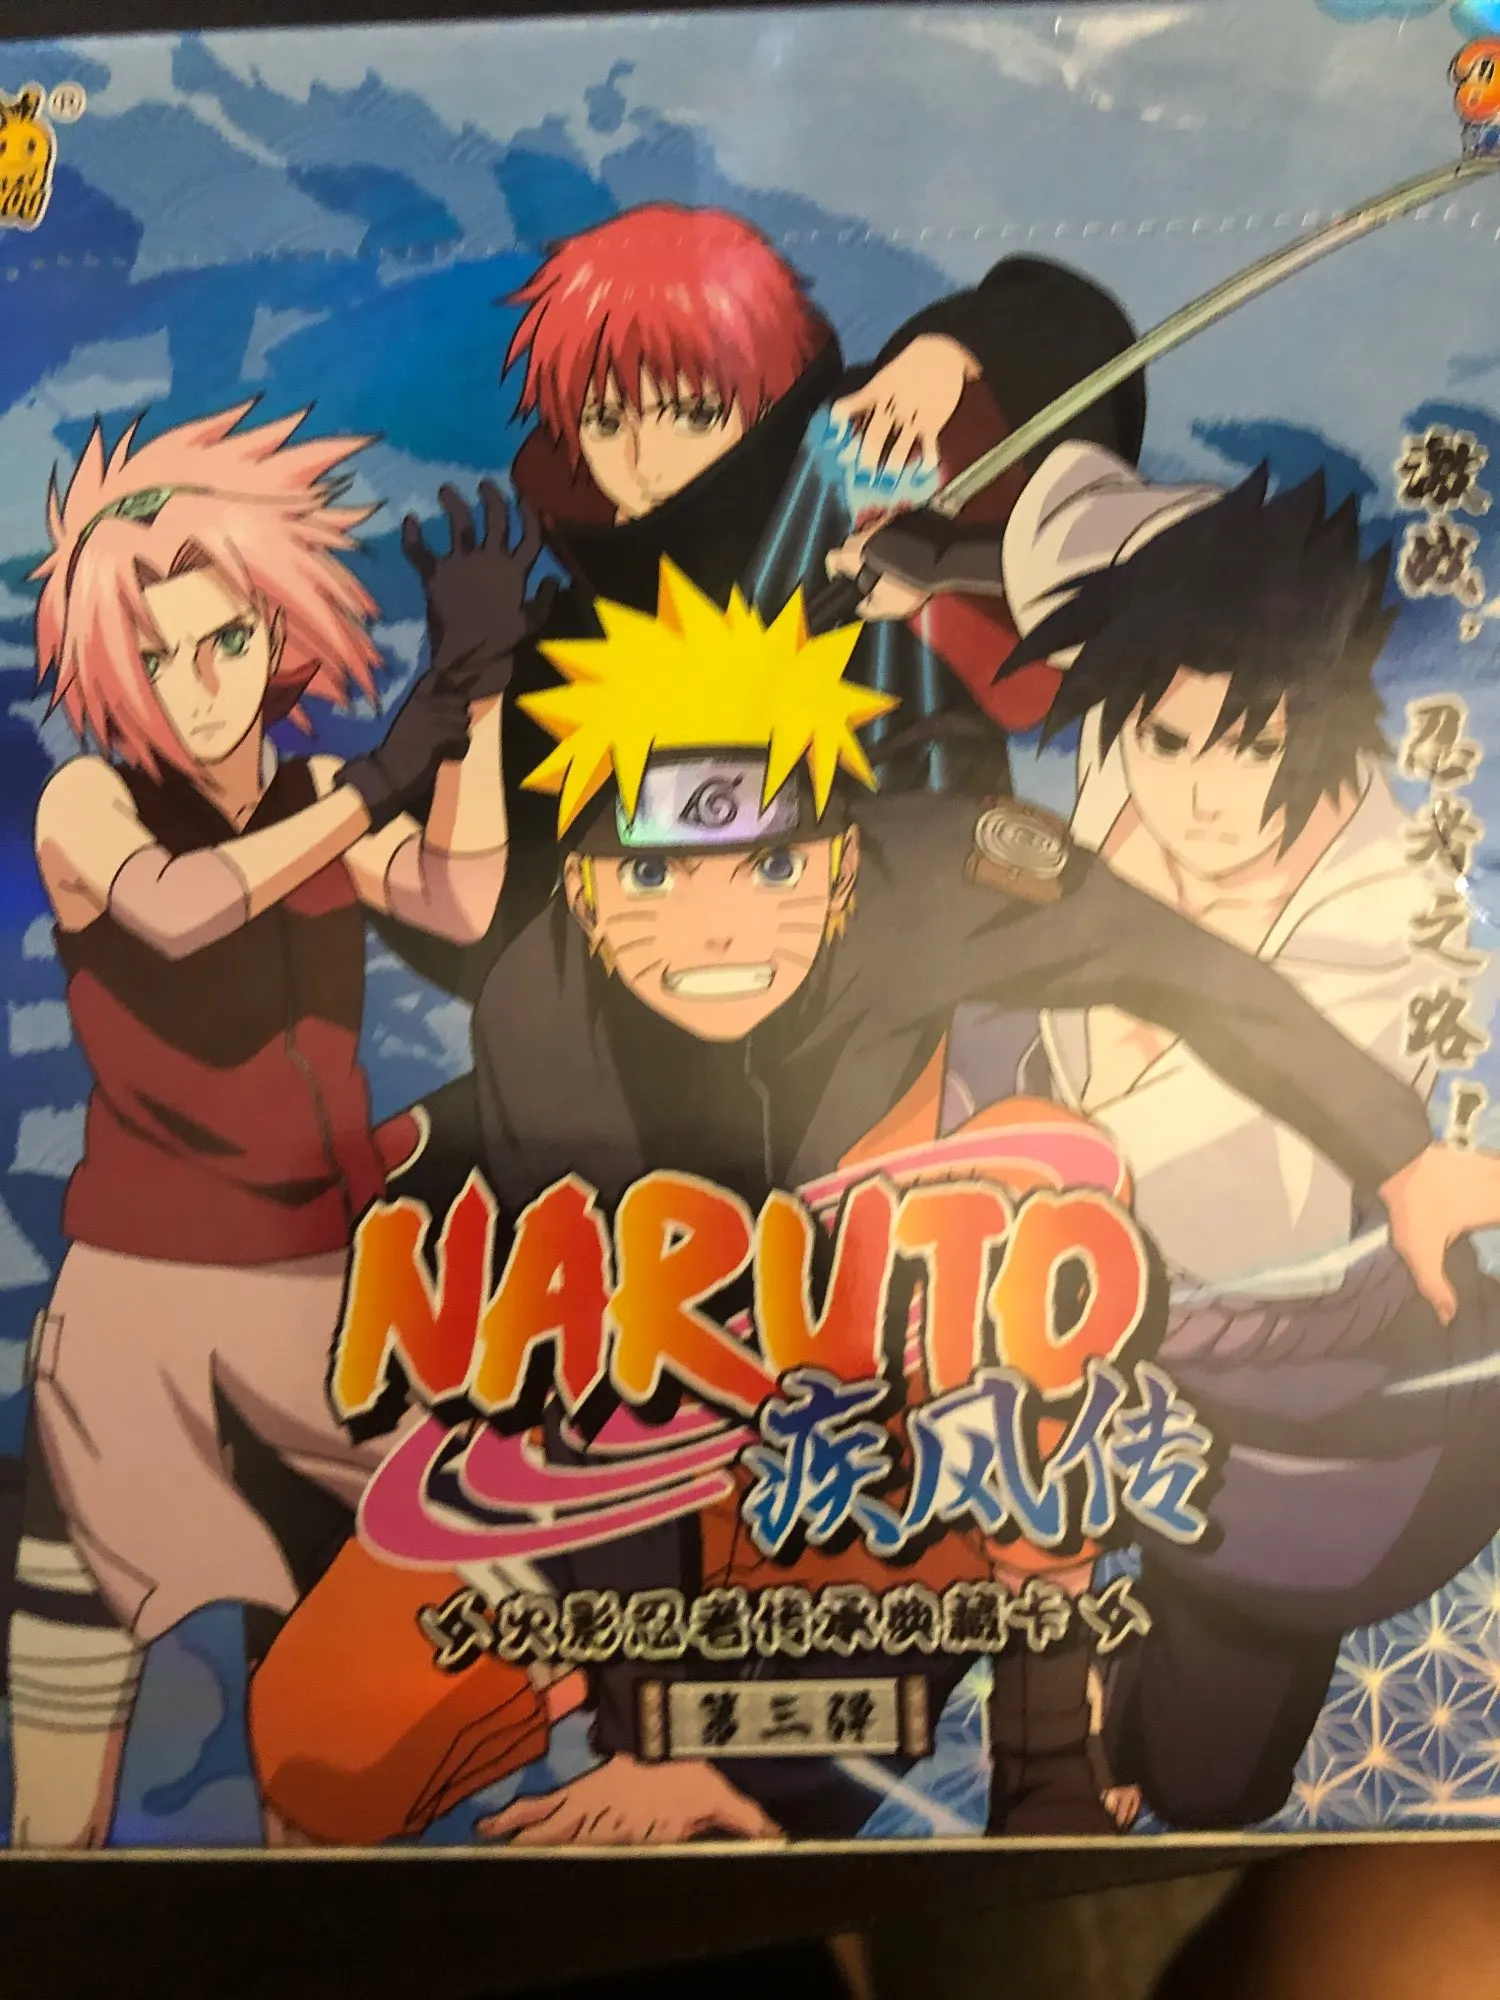 KAYOU Naruto Soldier Chapter Deluxe Edition Rare SP CR ZR MR Collector Card Boy Toy Gift photo review